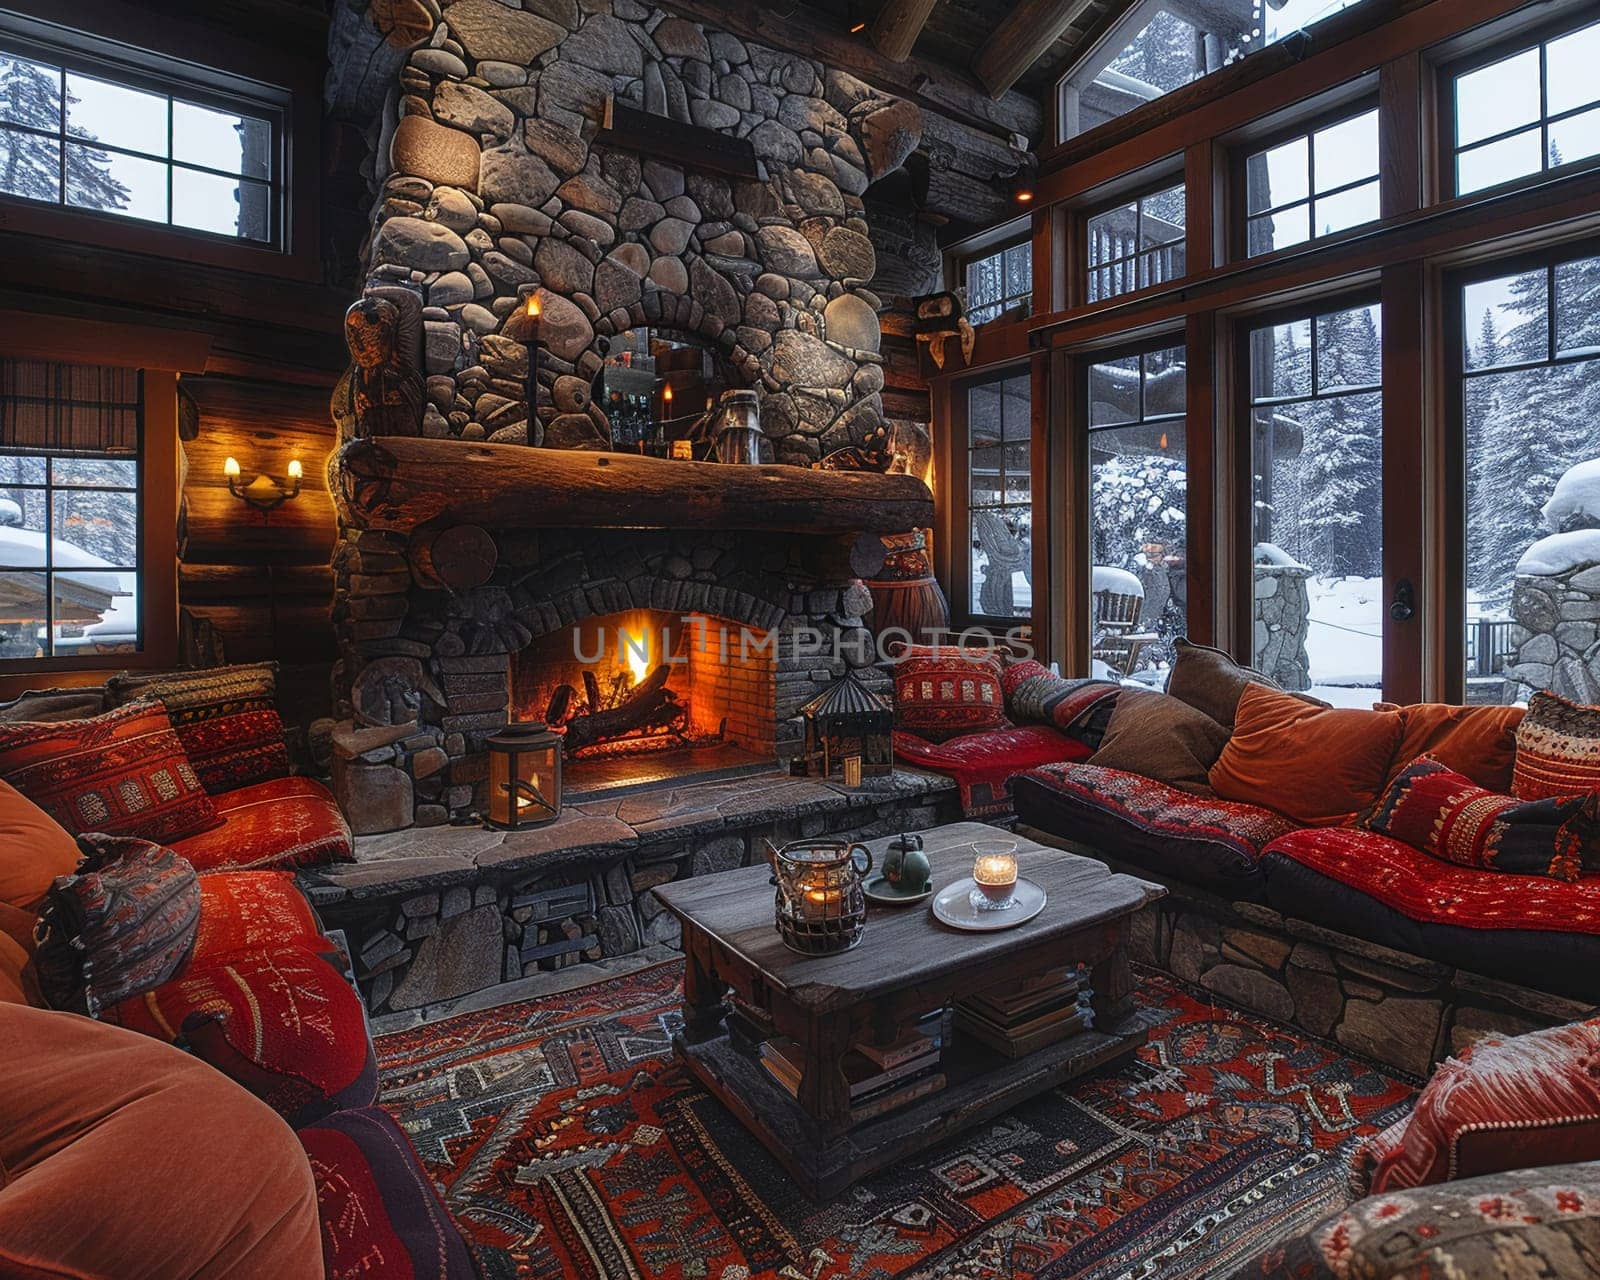 Cozy ski lodge living room with a stone fireplace and comfortable seating.